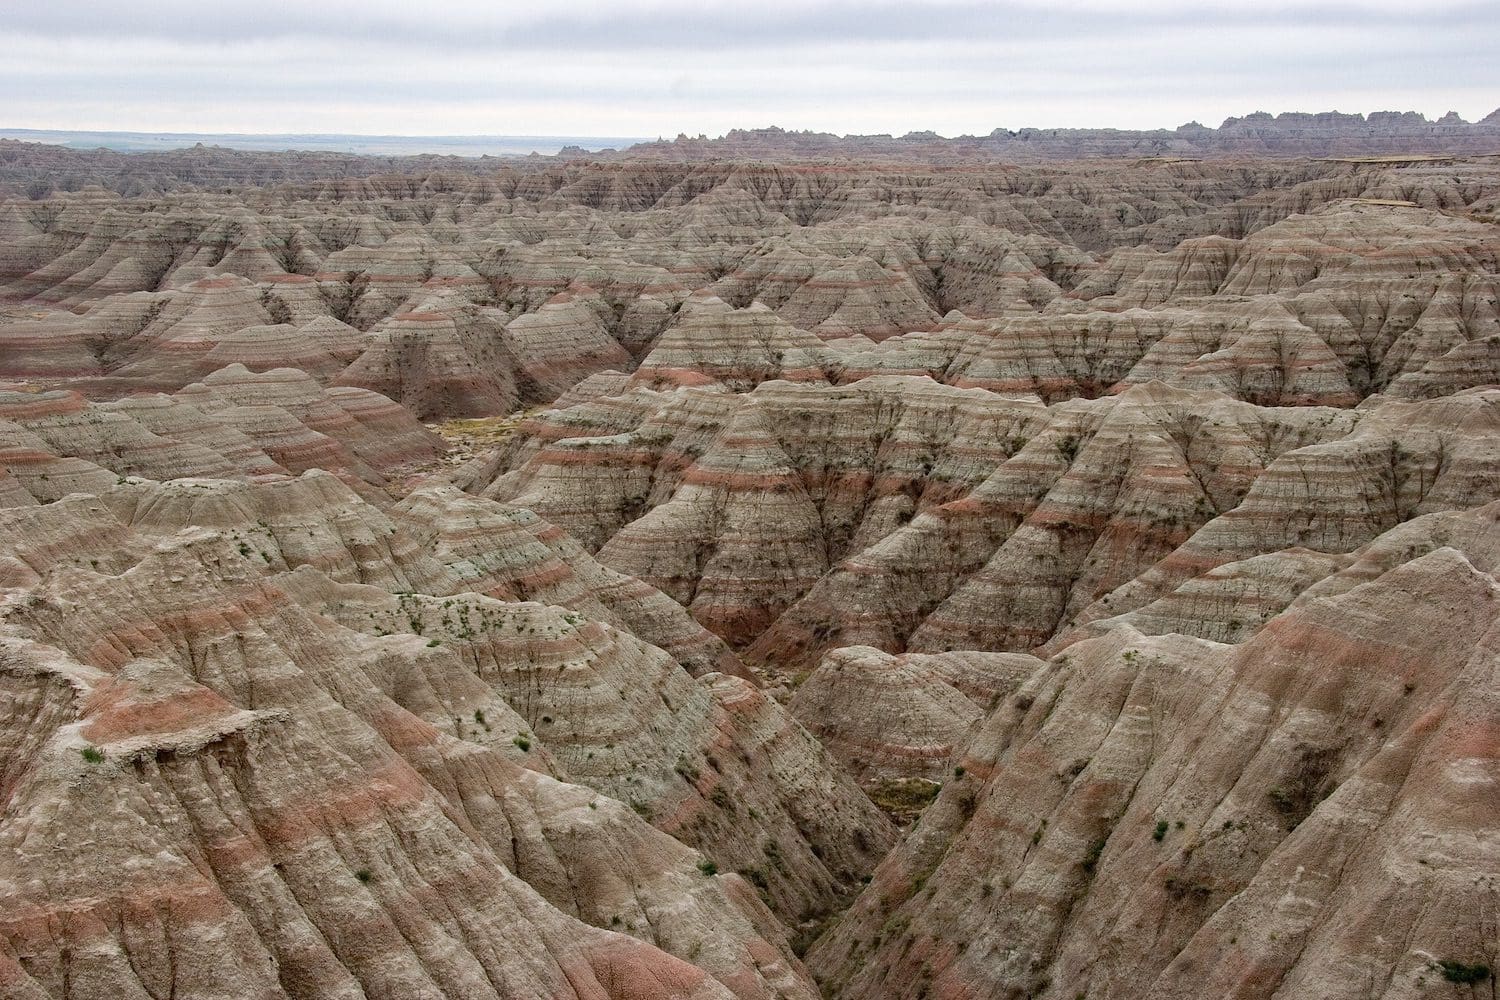 wide view of the Badlands located in Wall, South Dakota